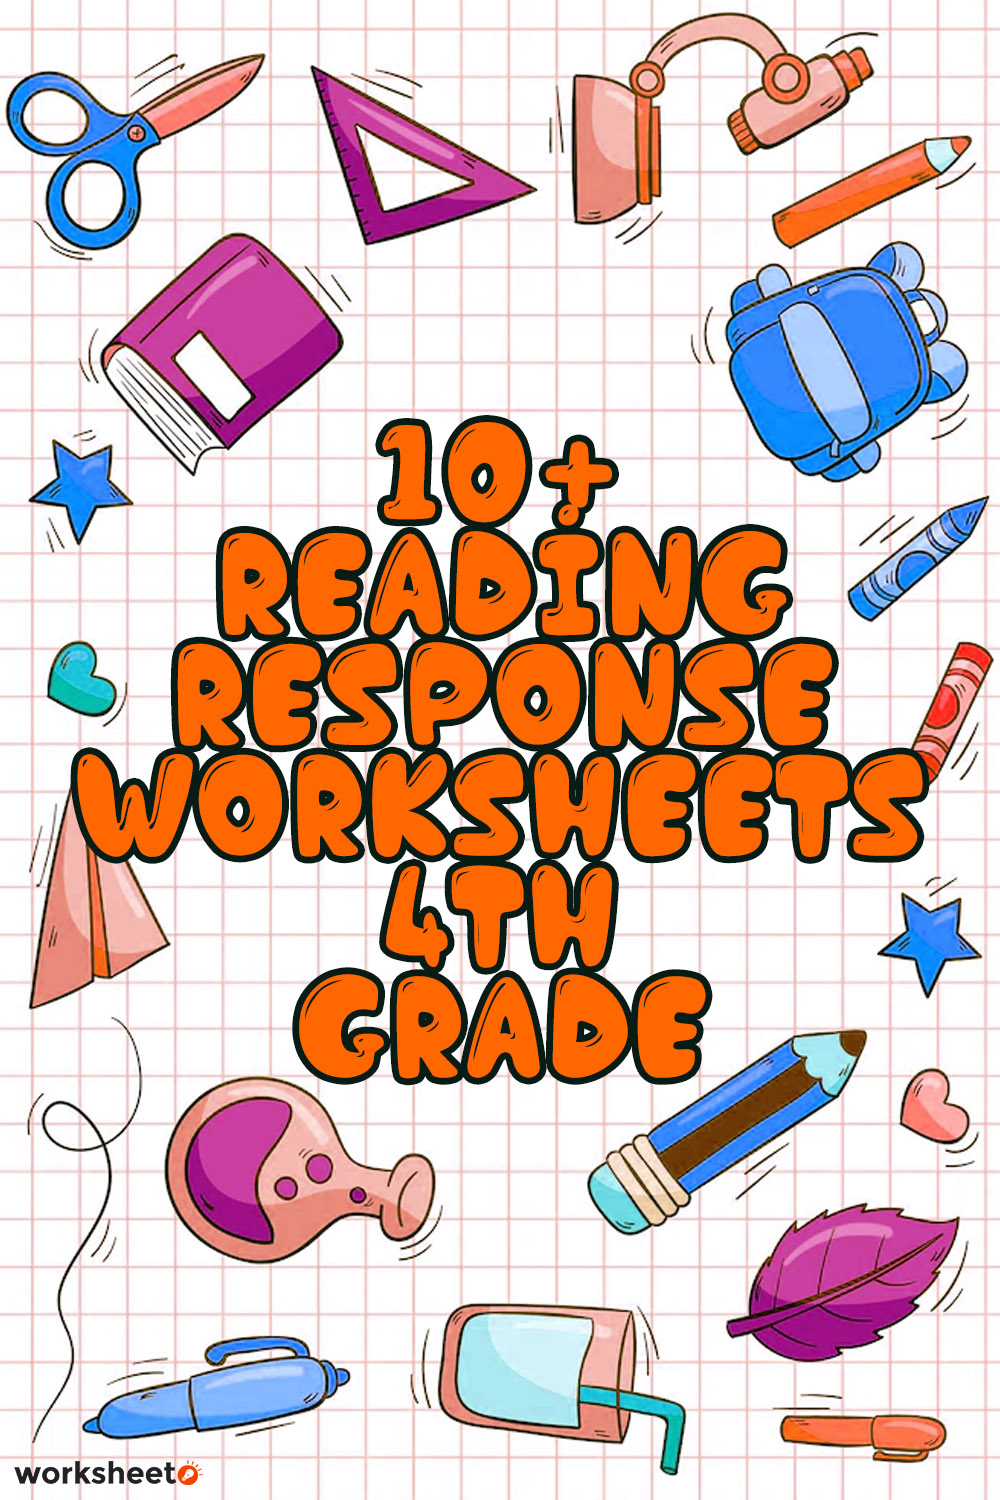 18 Images of Reading Response Worksheets 4th Grade